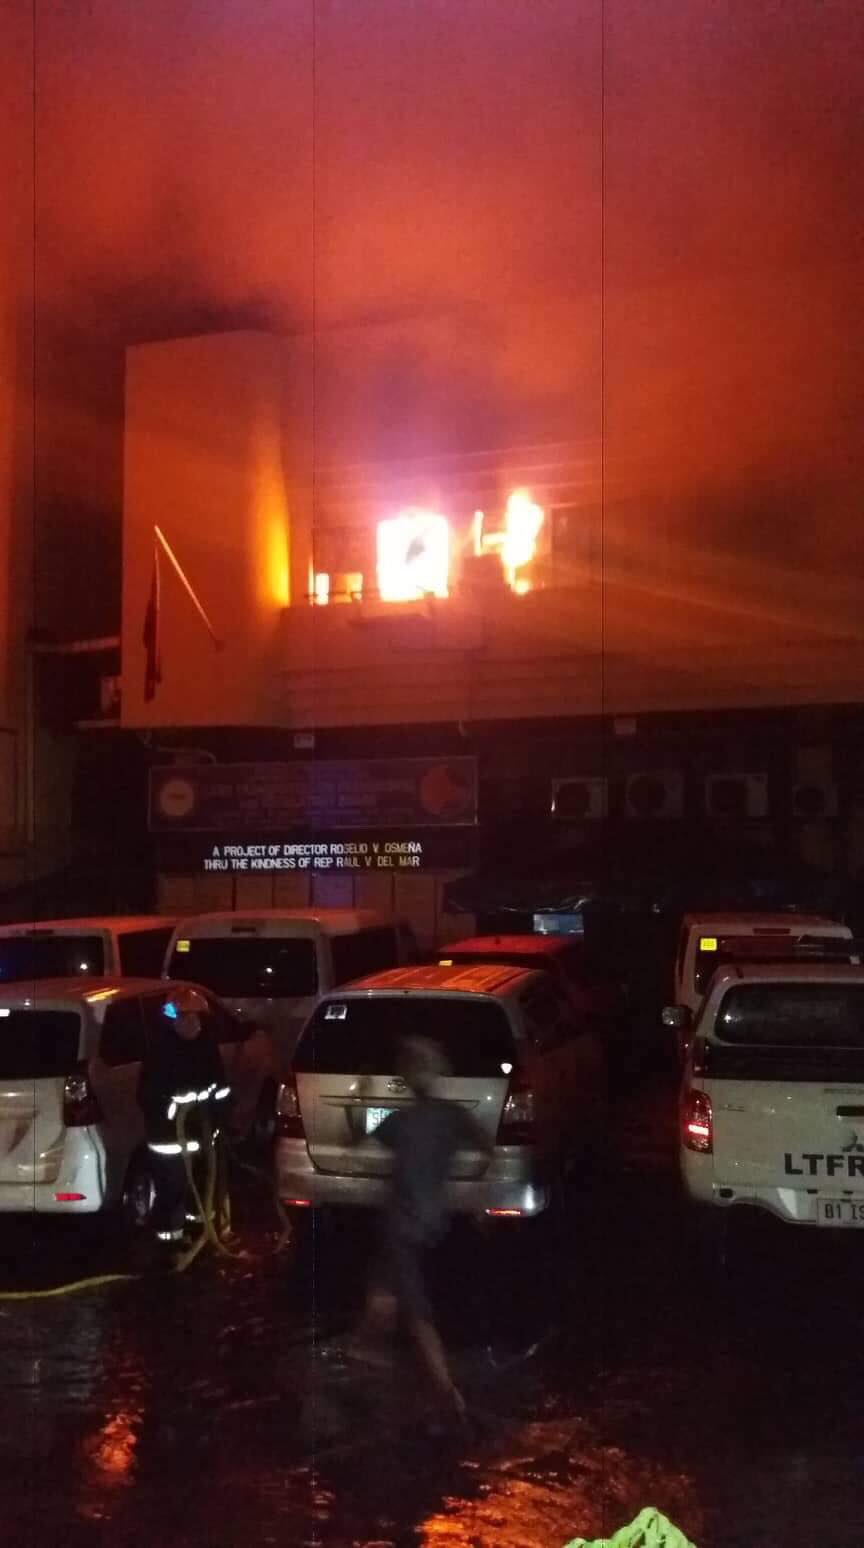 Fire engulfs the Land Transportation Franchising and Regulatory Board in Central Visayas (LTFRB-7) office at the North Reclamation Area in Cebu City at 12:10 a.m.